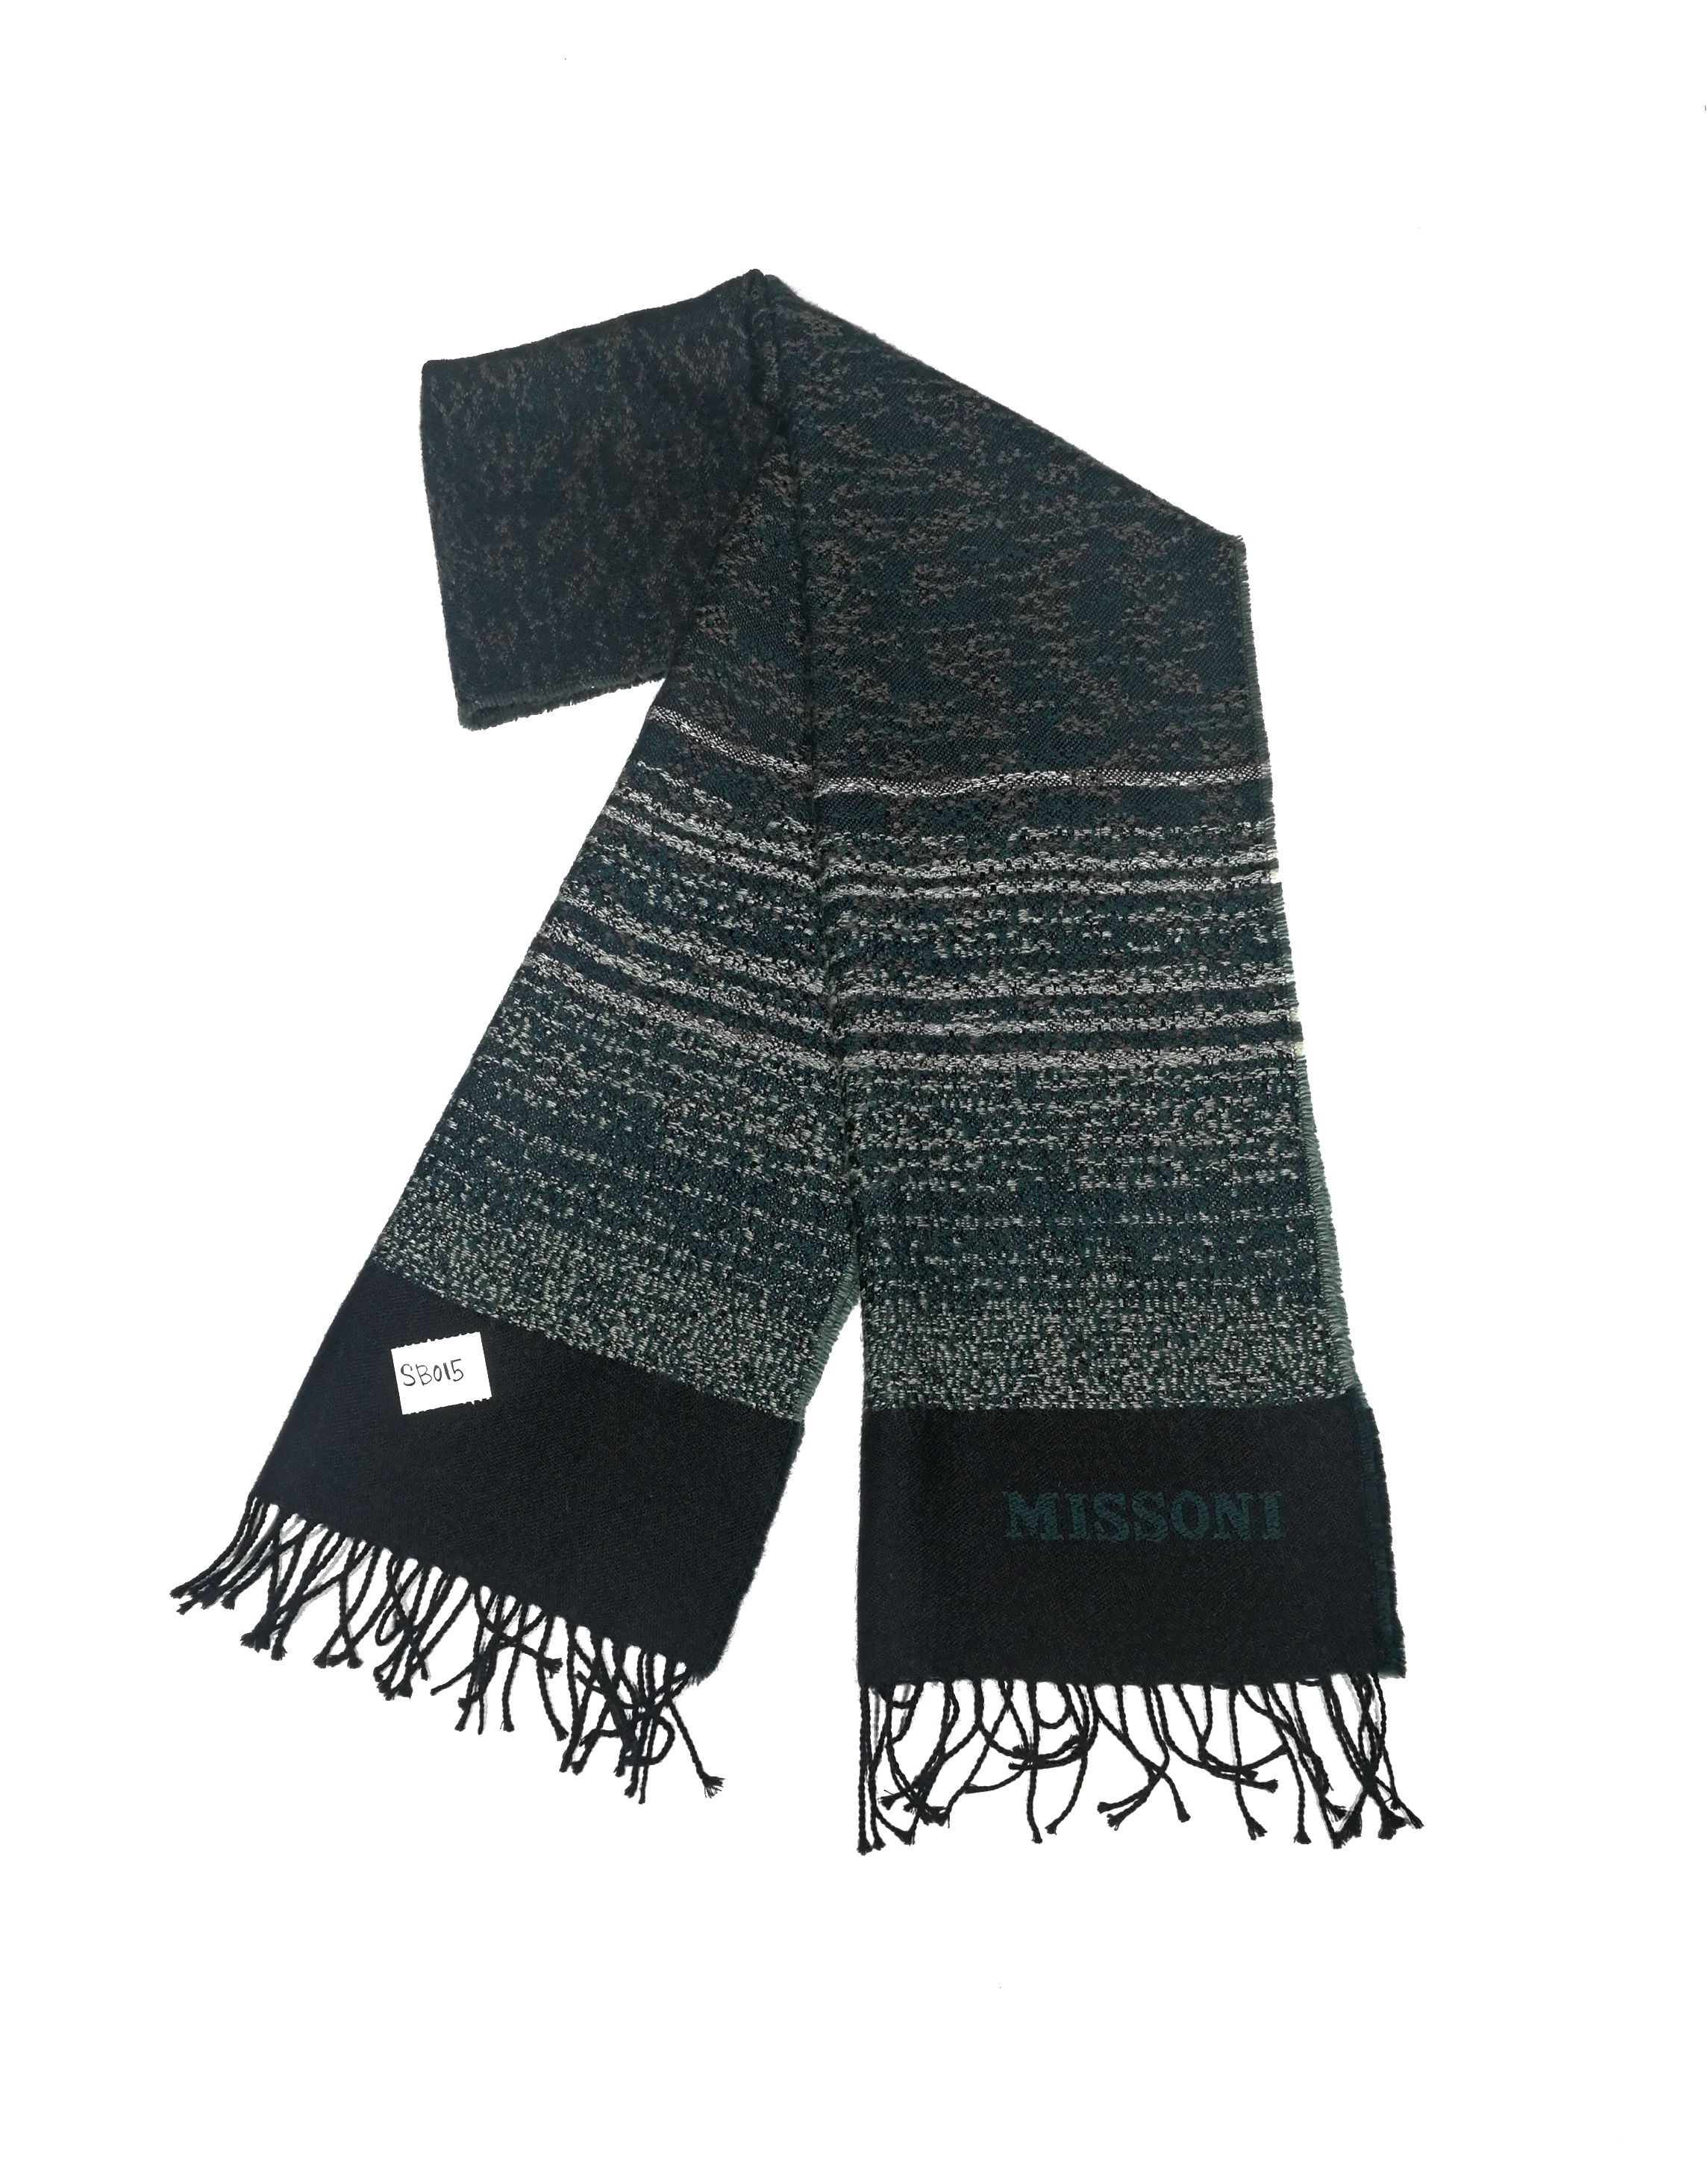 Hot Sale!! Missoni wool scarf very good conditions (SB015) - 1